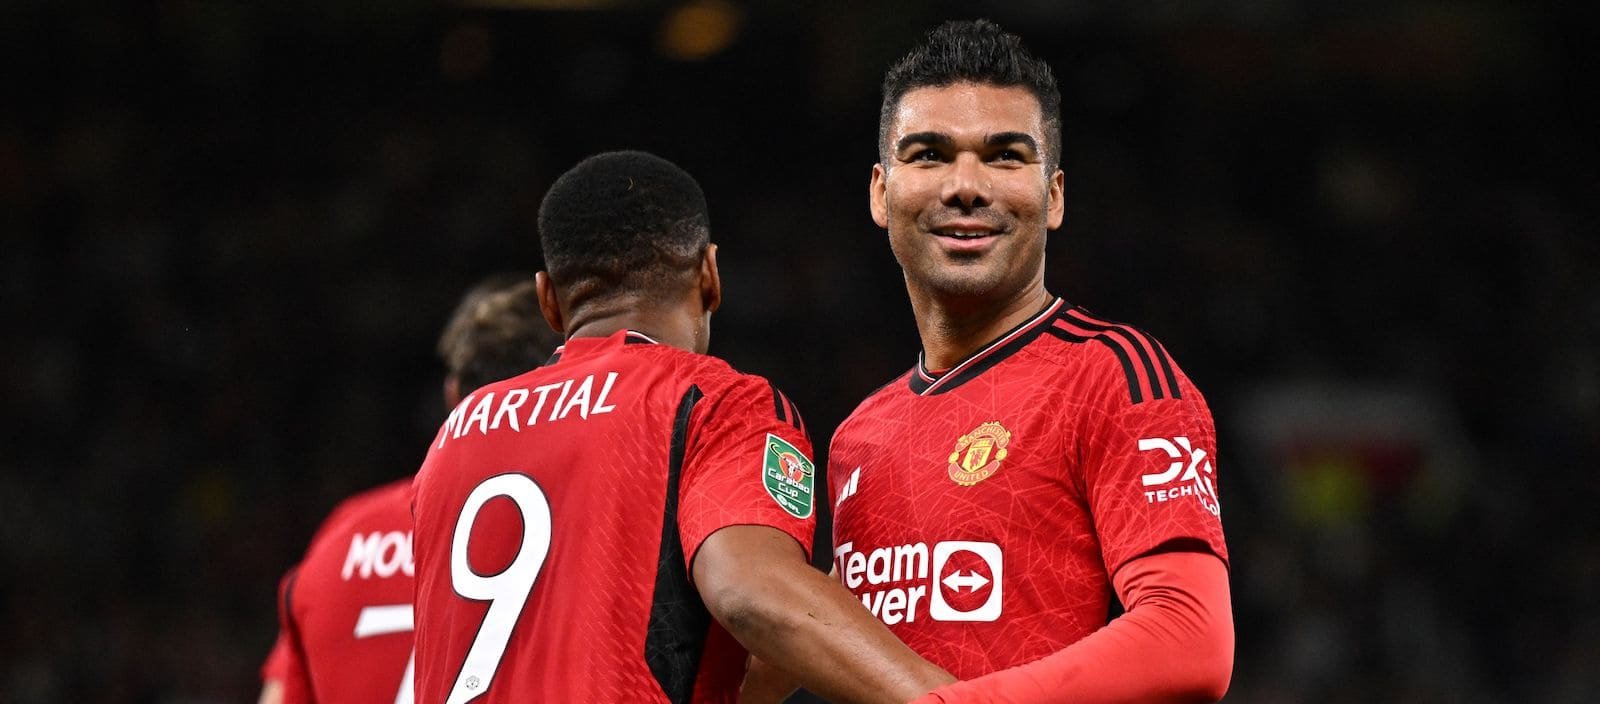 Casemiro insists he is happy at Manchester United despite rumours of a January exit – Man United News And Transfer News